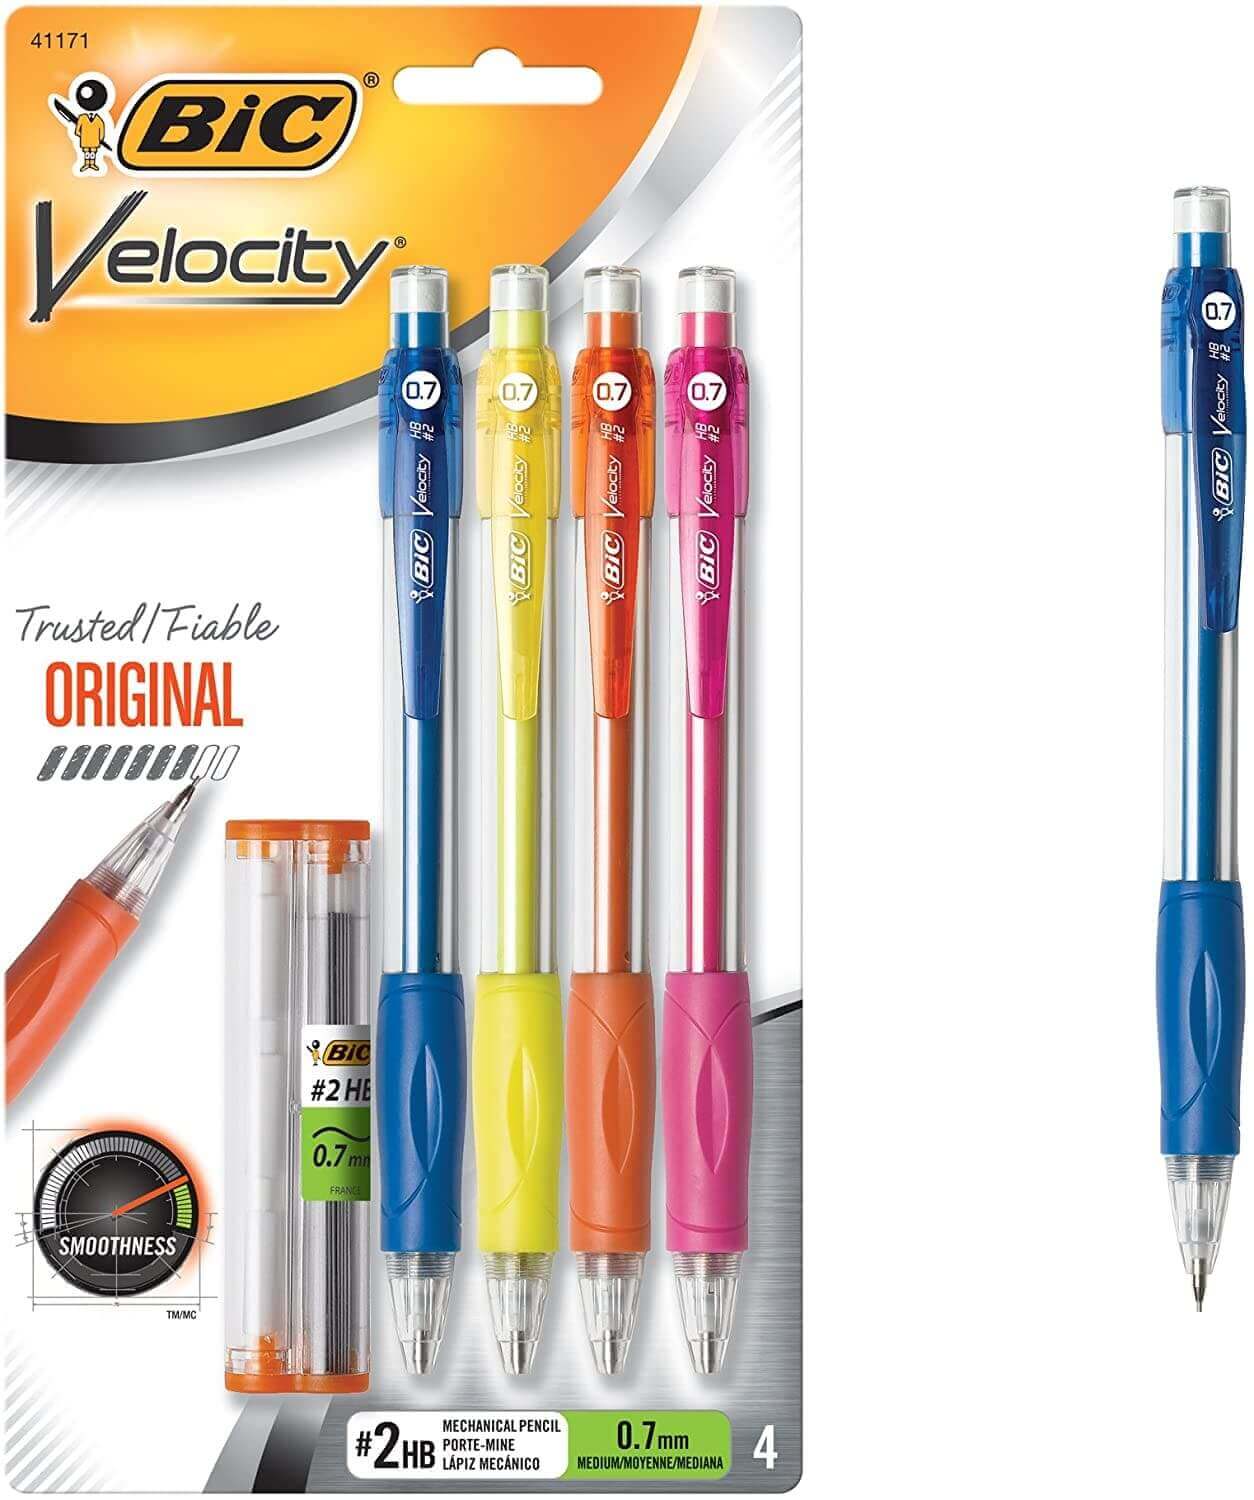 Four mechanical pencils in packaging, with additional lead and erasers.